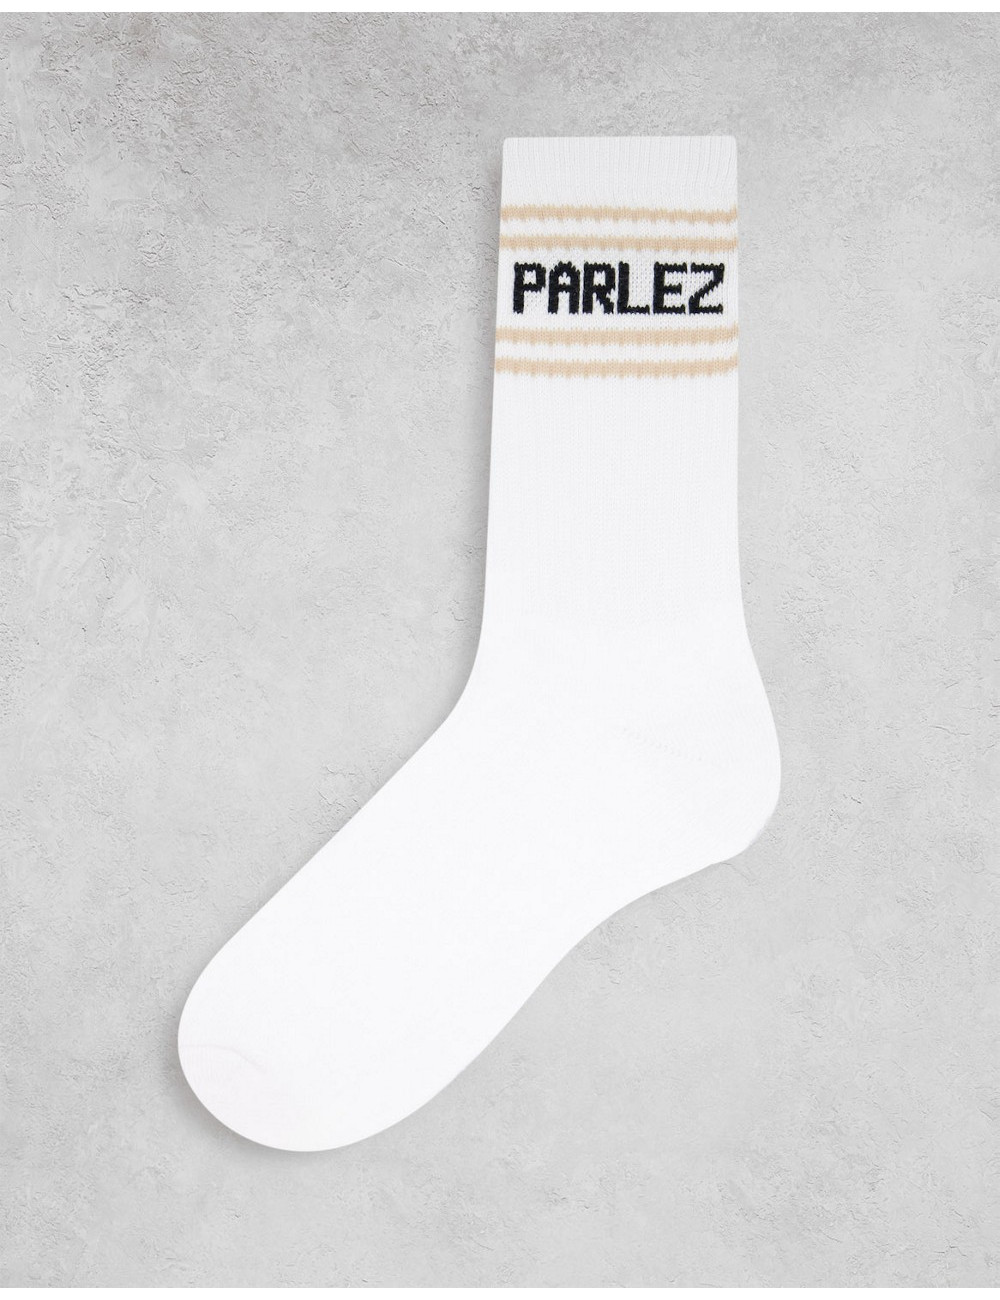 Parlez rode socks with sand...